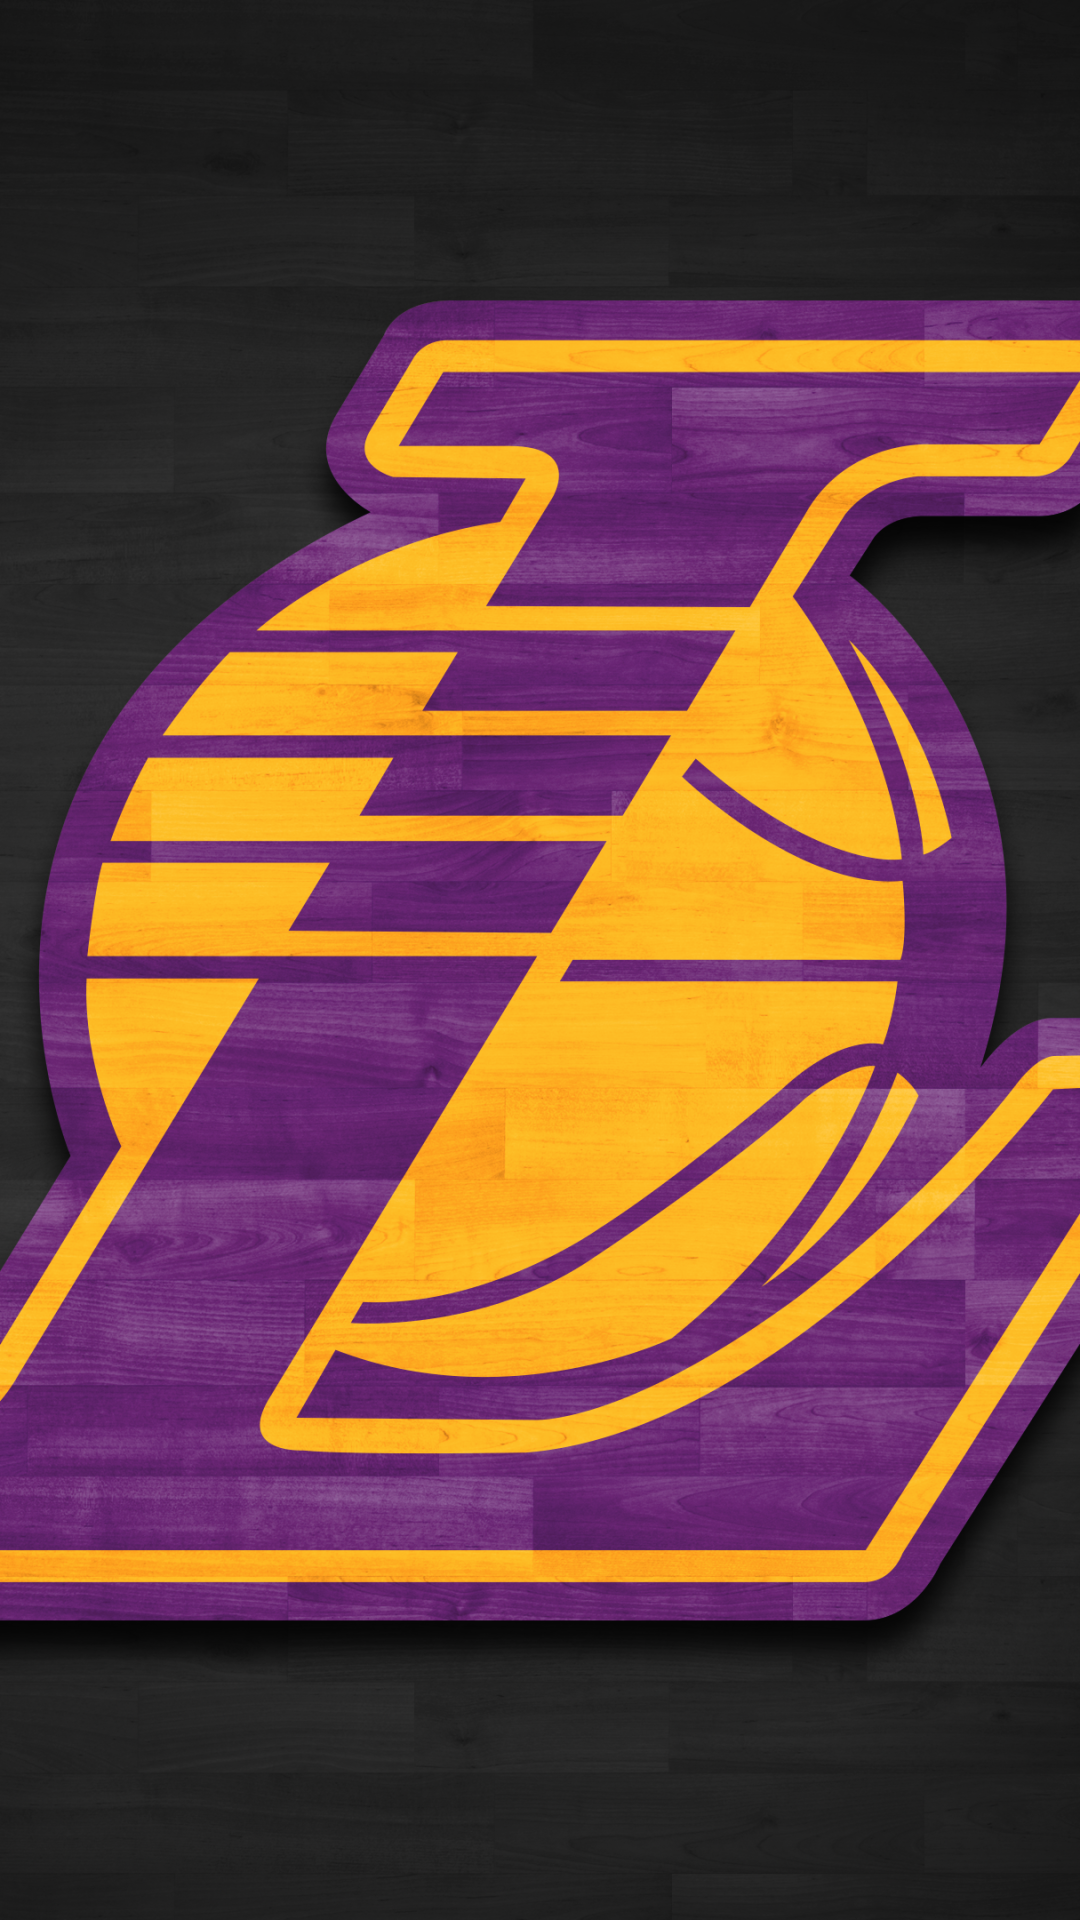 Los Angeles Lakers Phone Wallpaper by Michael Tipton